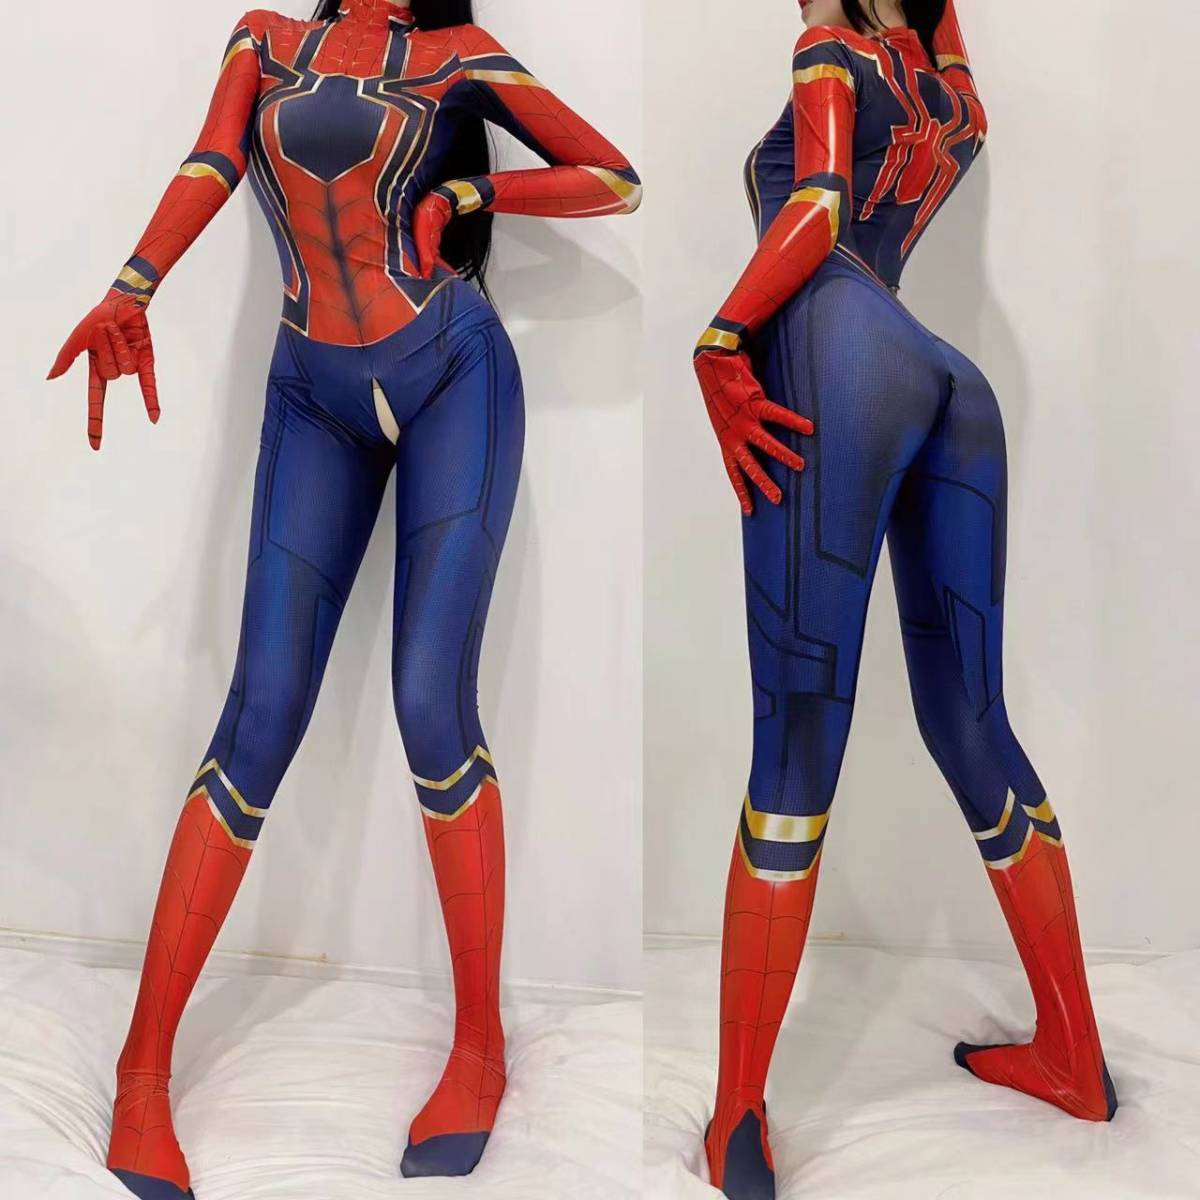  most new work [8504]Lsize super sexy 3D print Leotard whole body body suit lady's cosplay fancy dress photographing Spider-Man open black chi